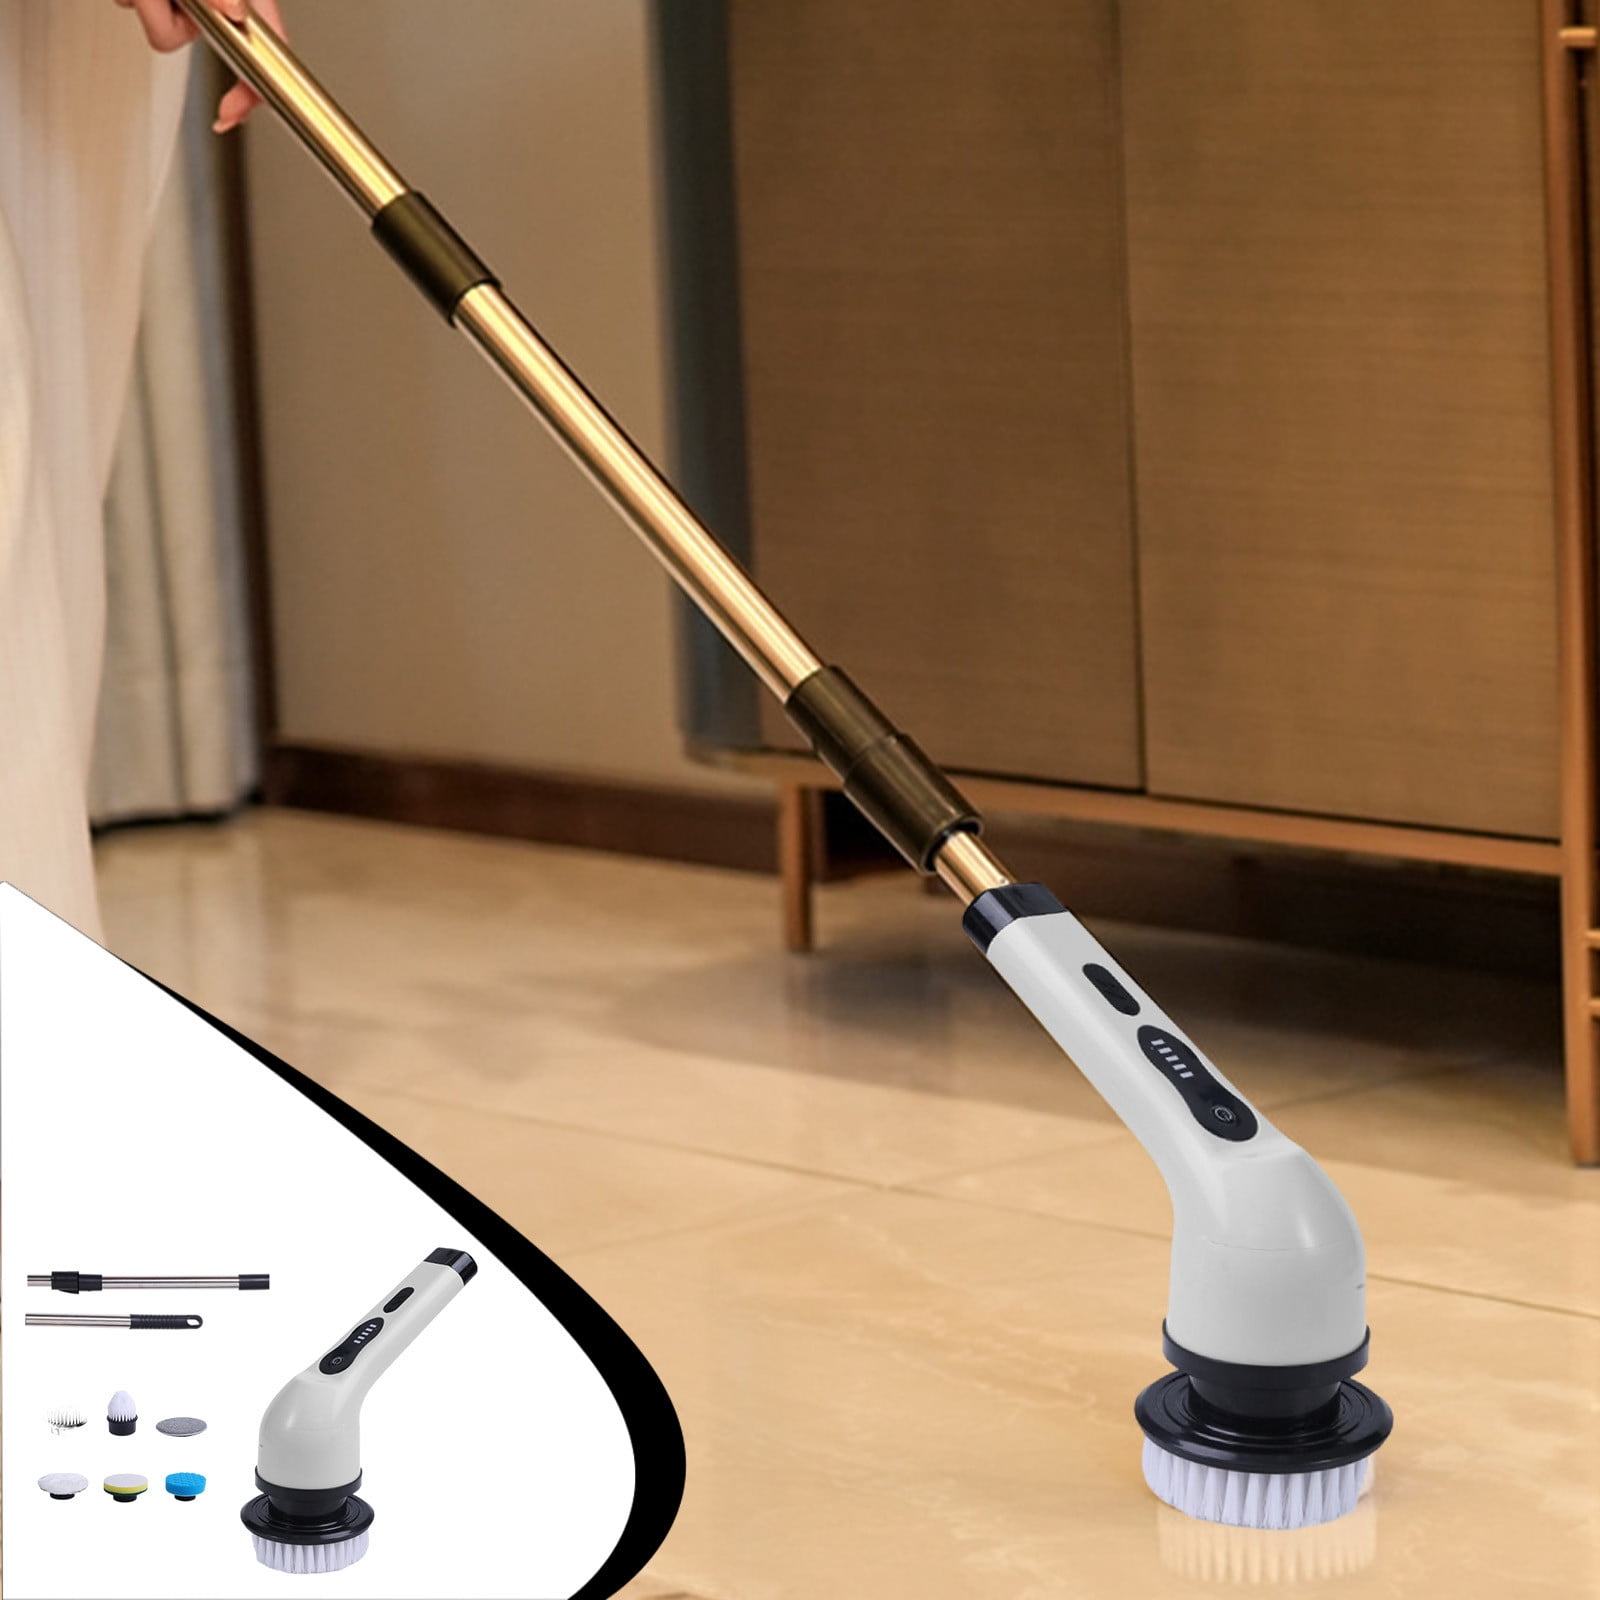 New Electric Cleaning Brush Electric Multifunctional Dish Brush – My Store  best deals